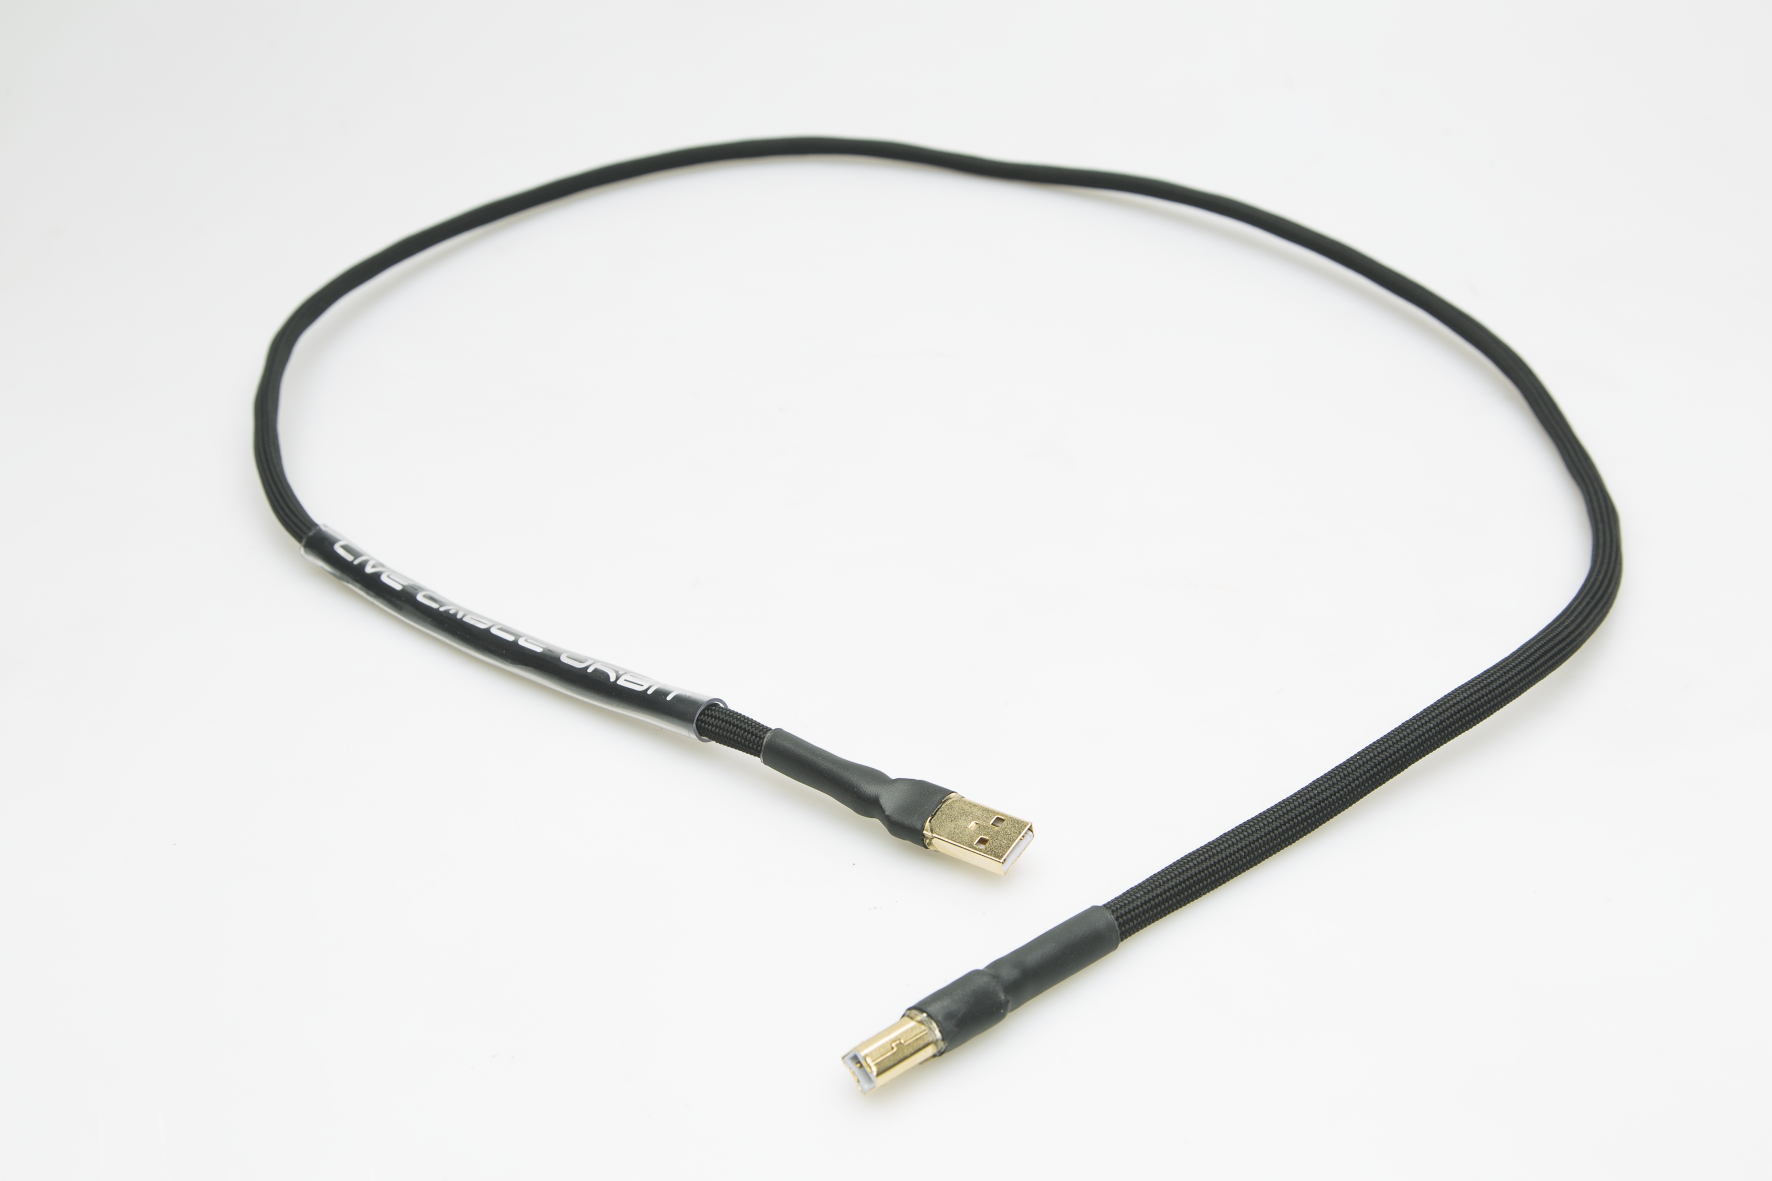 Live Cable - Orbit USB Cable